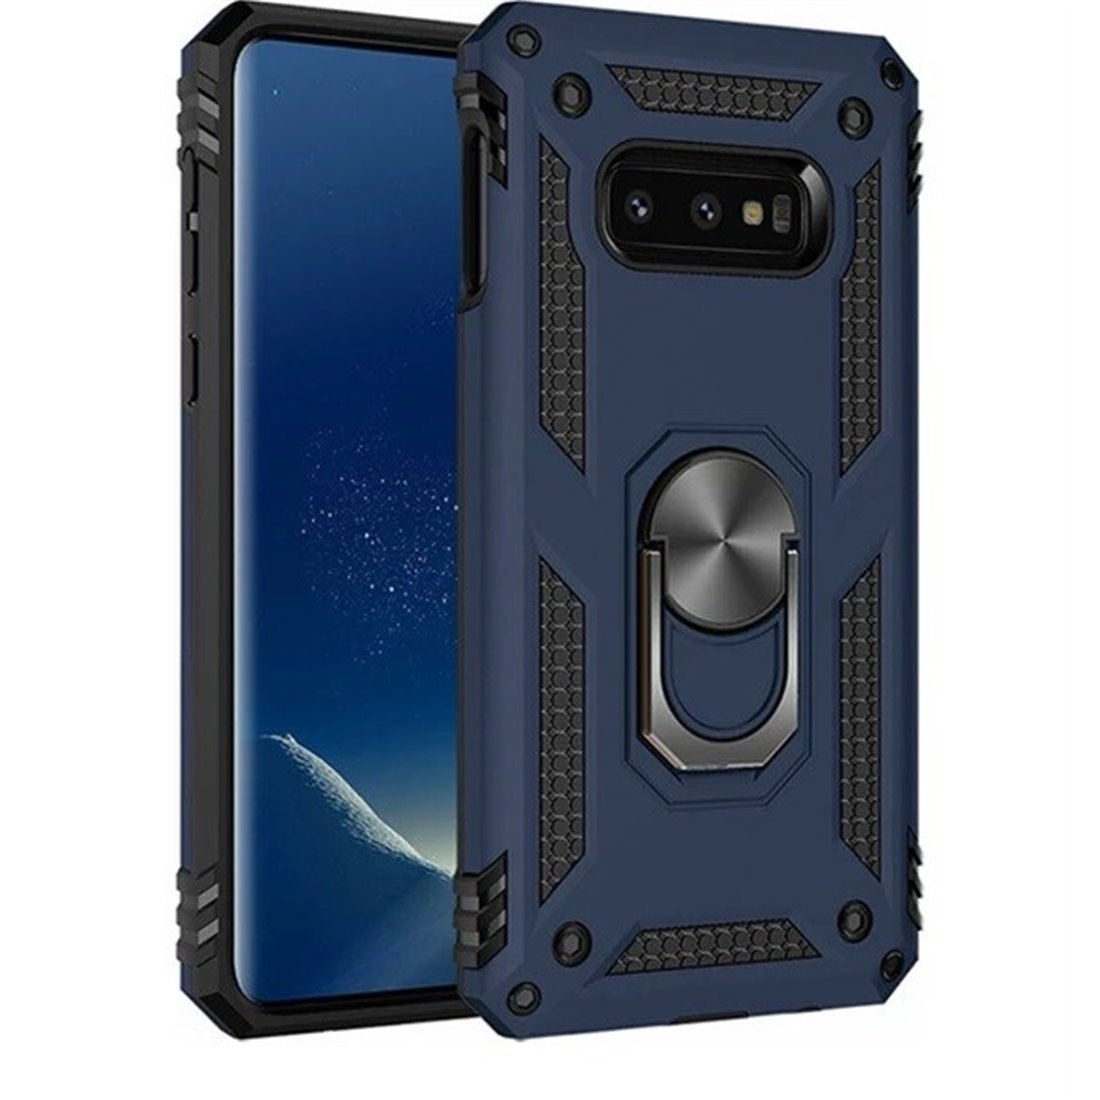 Samsung Galaxy S10E Plastic Blue Back Cover - Solid ring